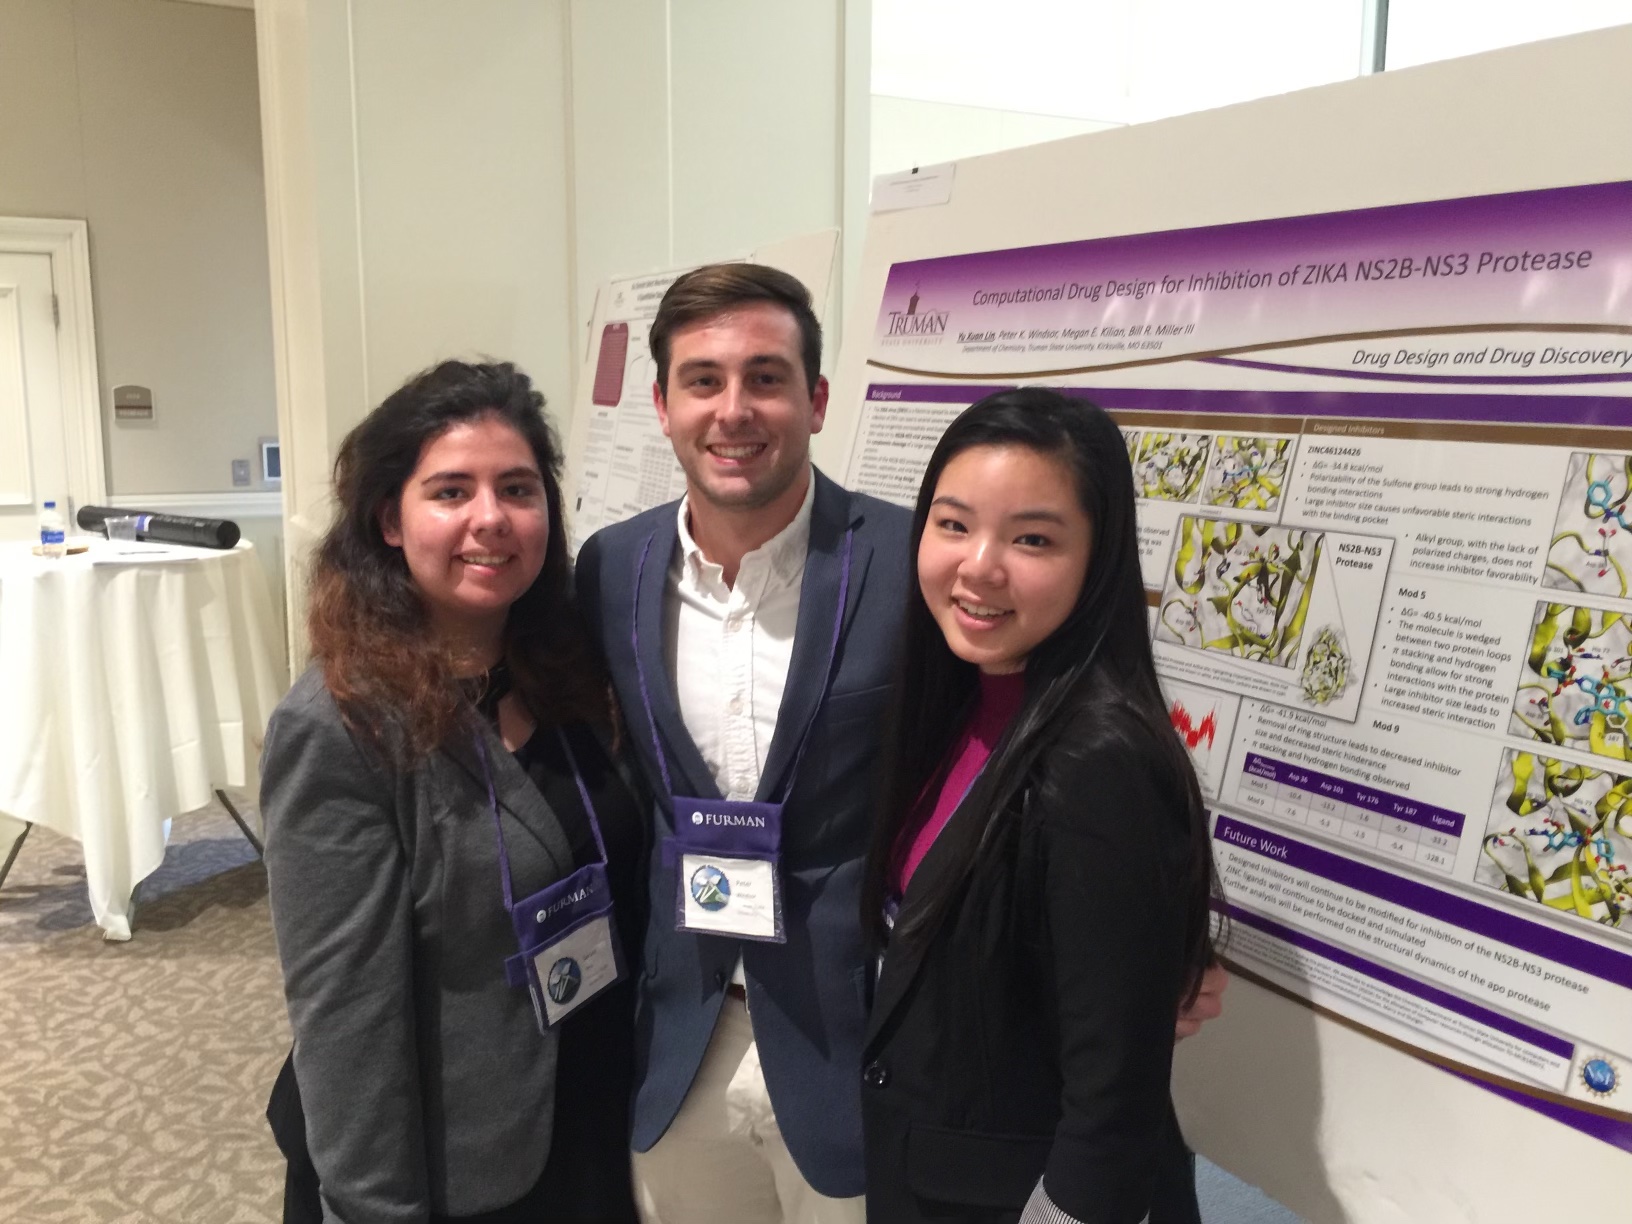 Ari, Peter, and Yu Xuan at the MERCURY conference poster session